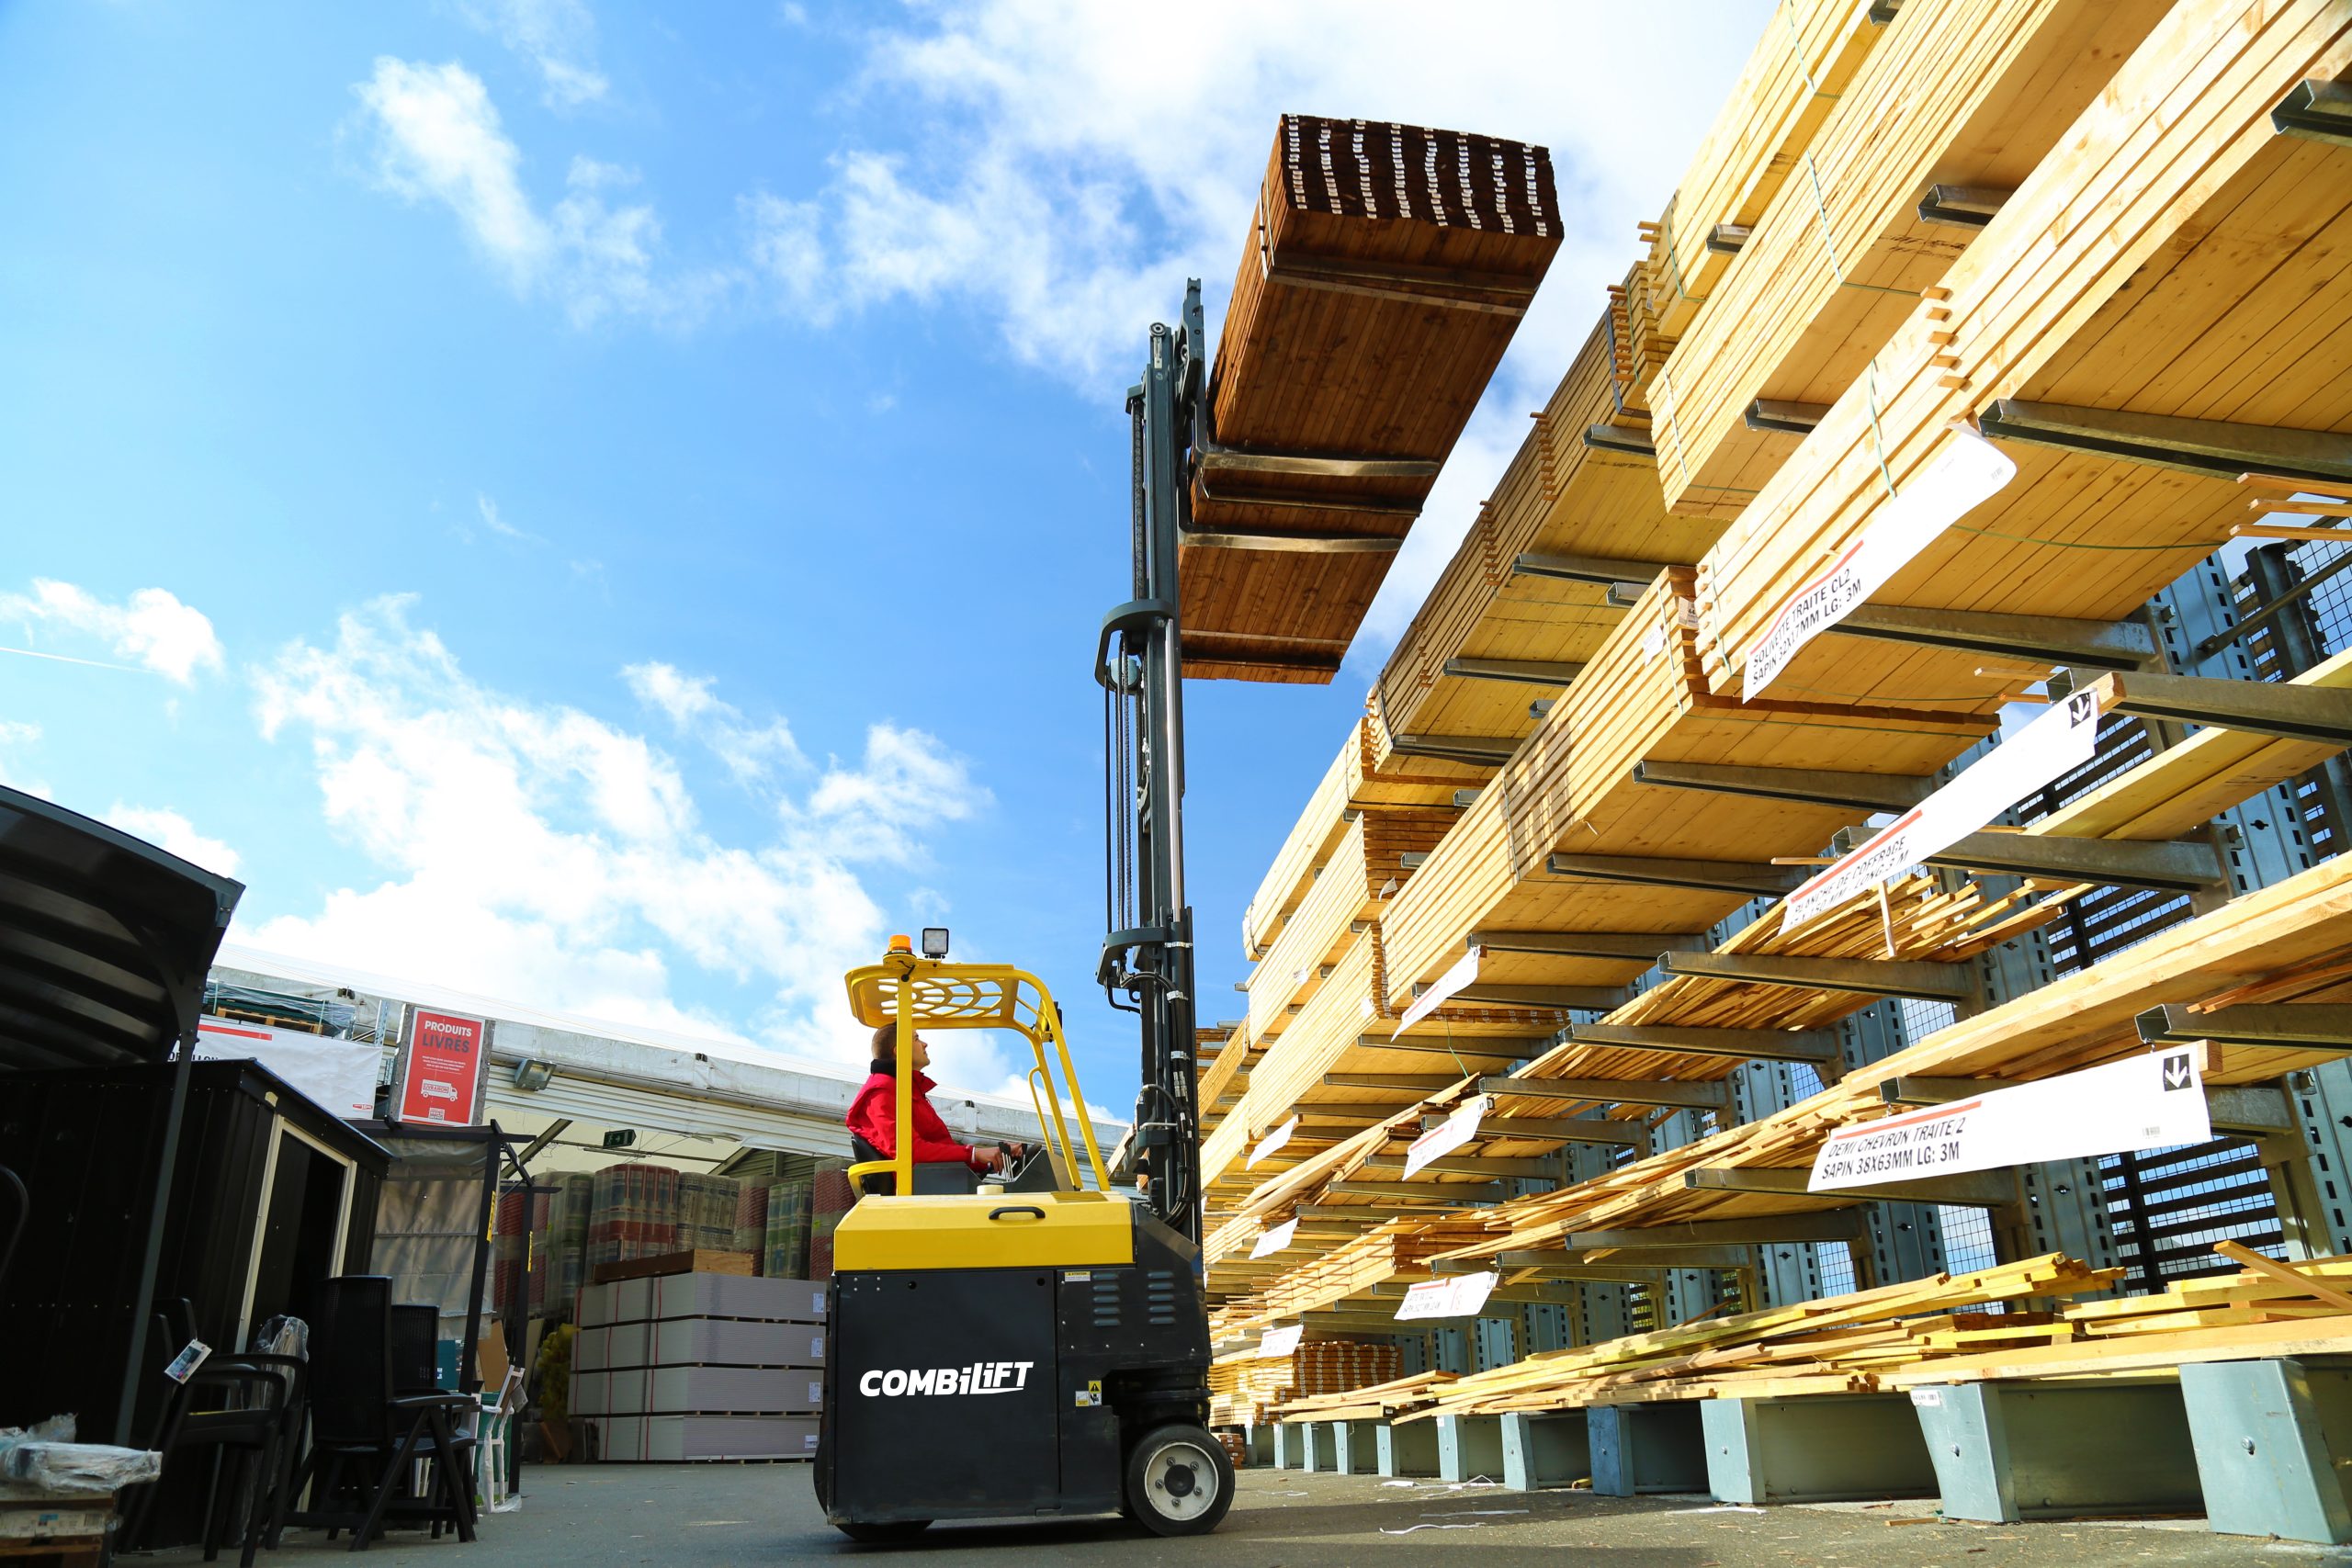 Combilift CB4000 Multi-directional counterbalance electric forklift in use (Timber)